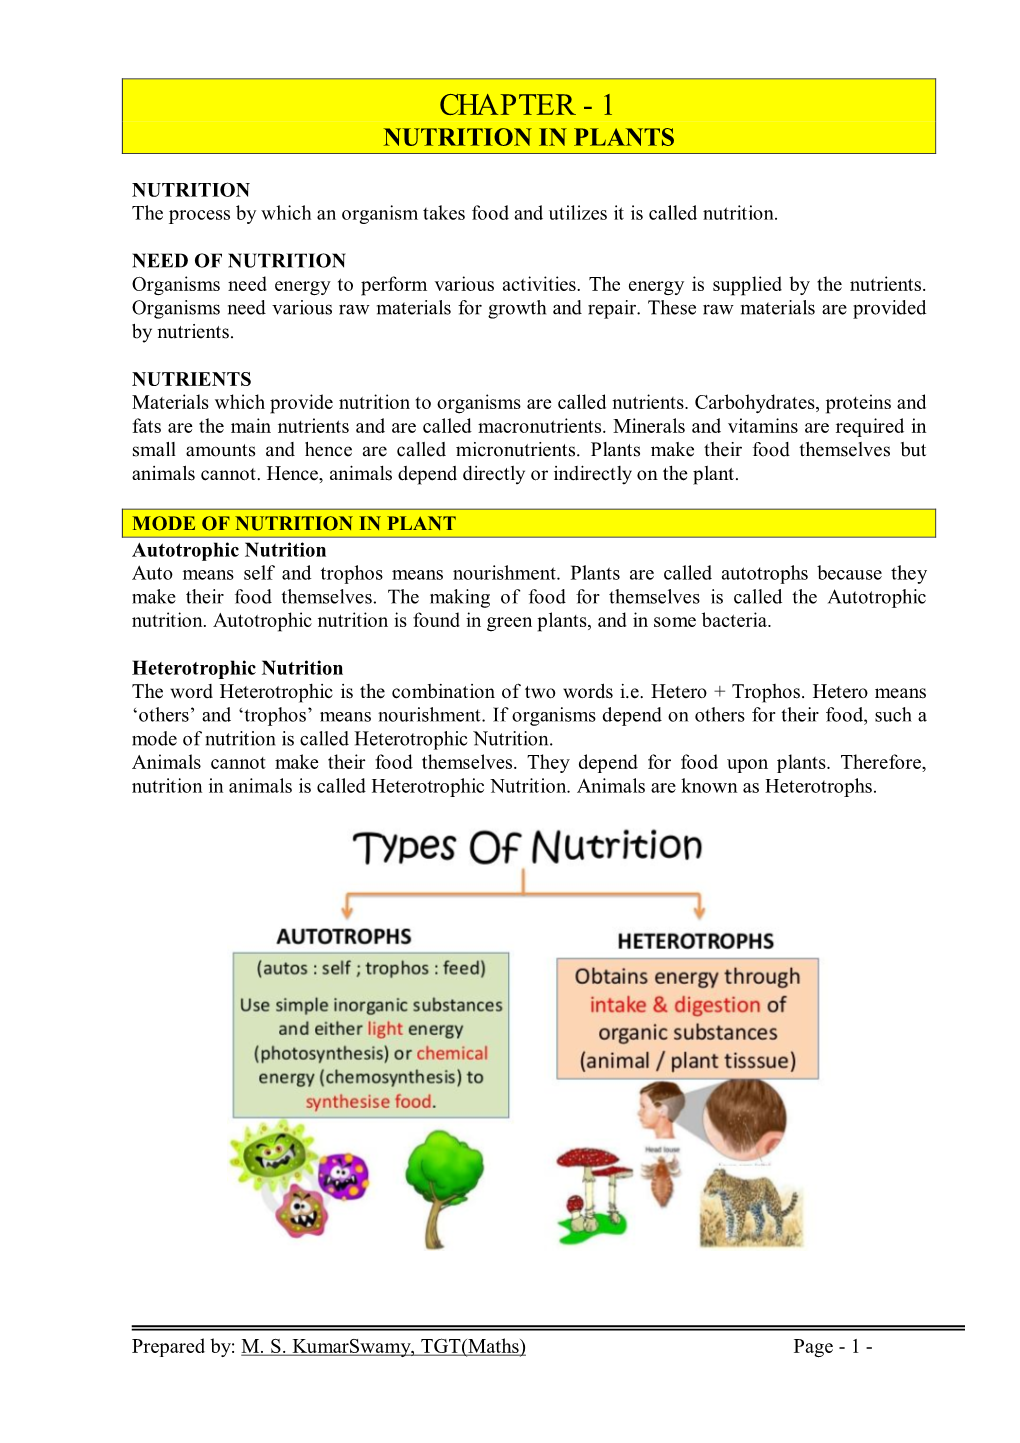 Chapter - 1 Nutrition in Plants